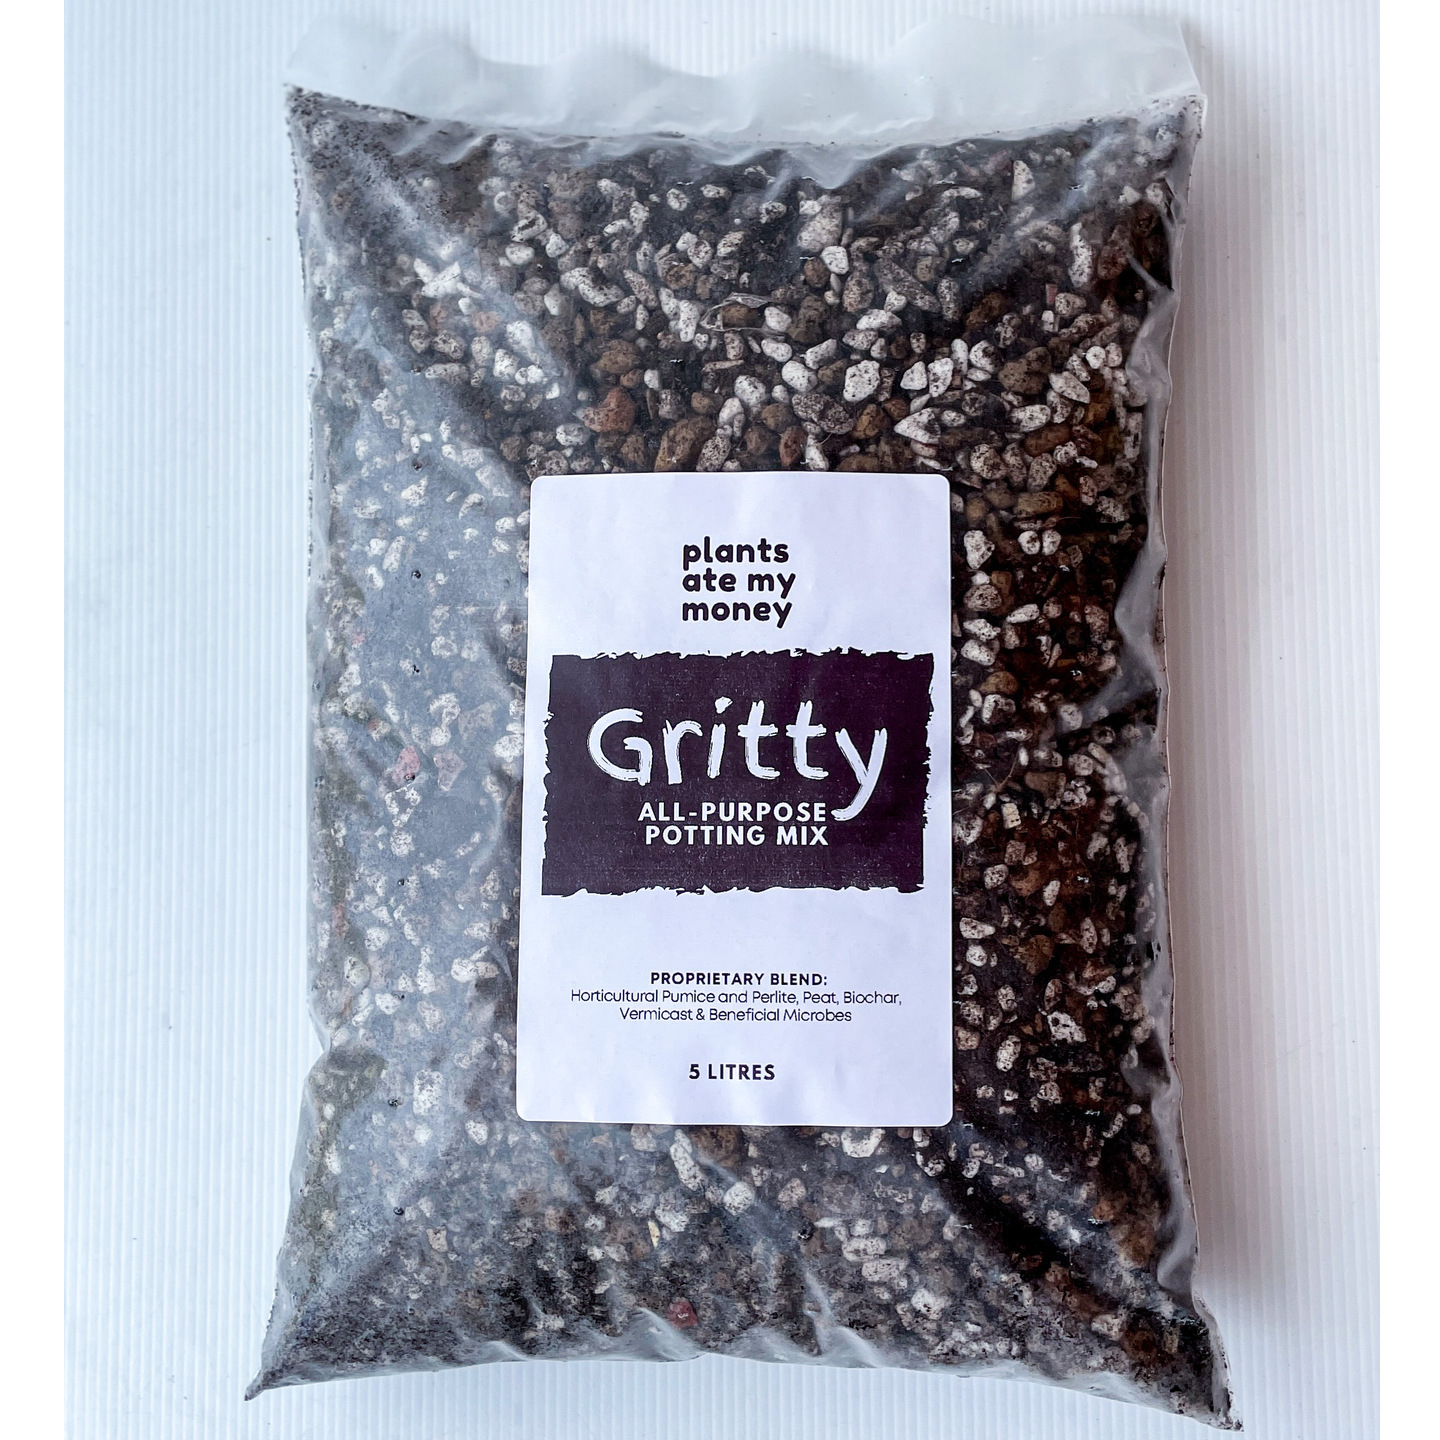 Gritty All-Purpose Potting Mix